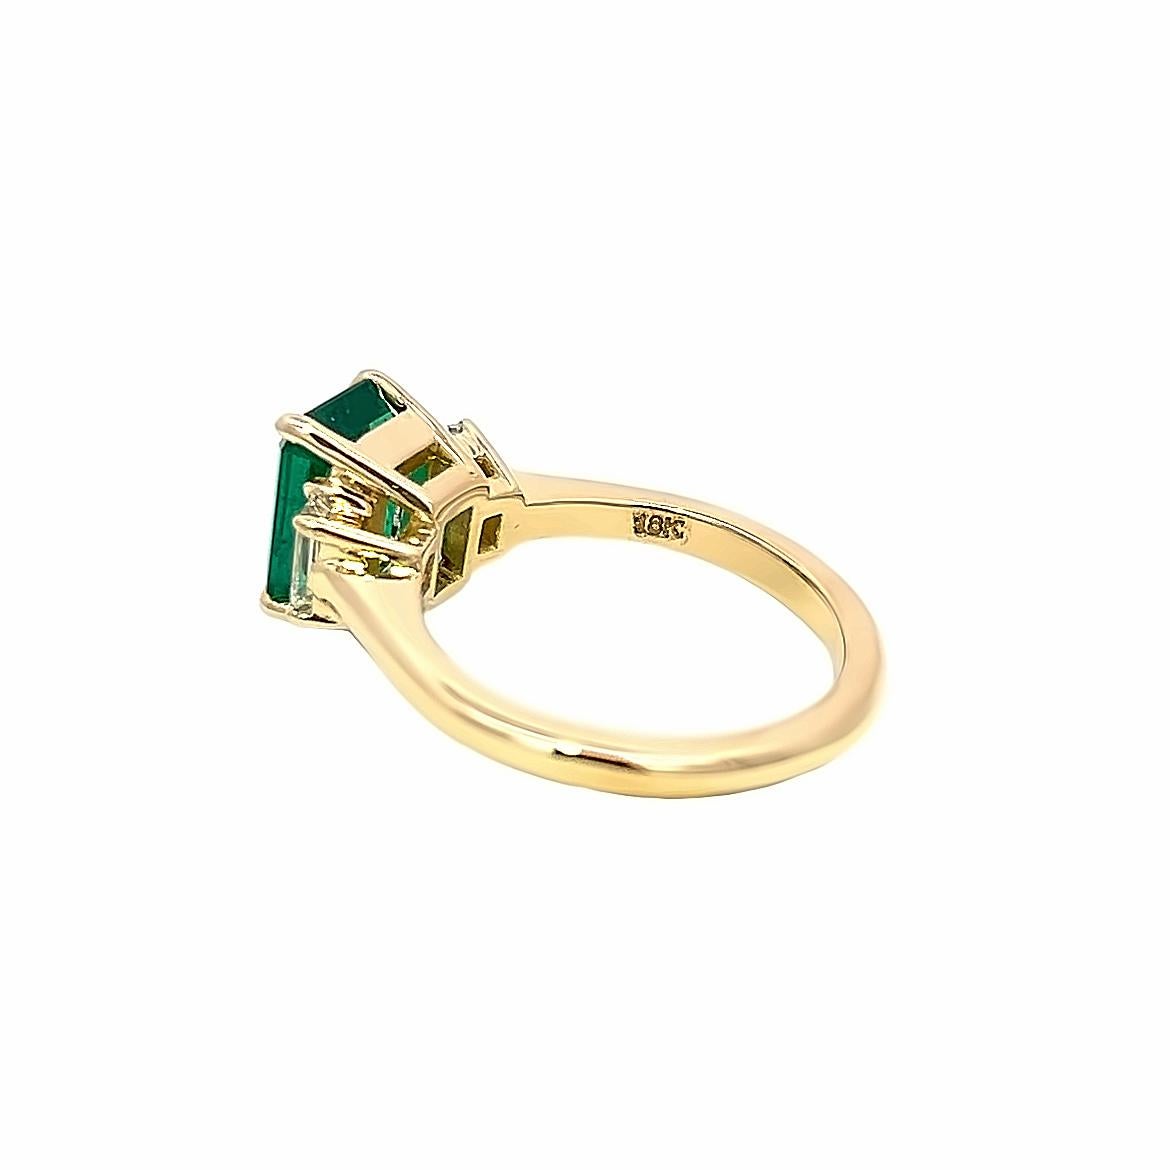 1.98CT Octagonal Emerald with Diamonds Ring, GIA Certified, set in 18K YG In New Condition For Sale In New York, NY